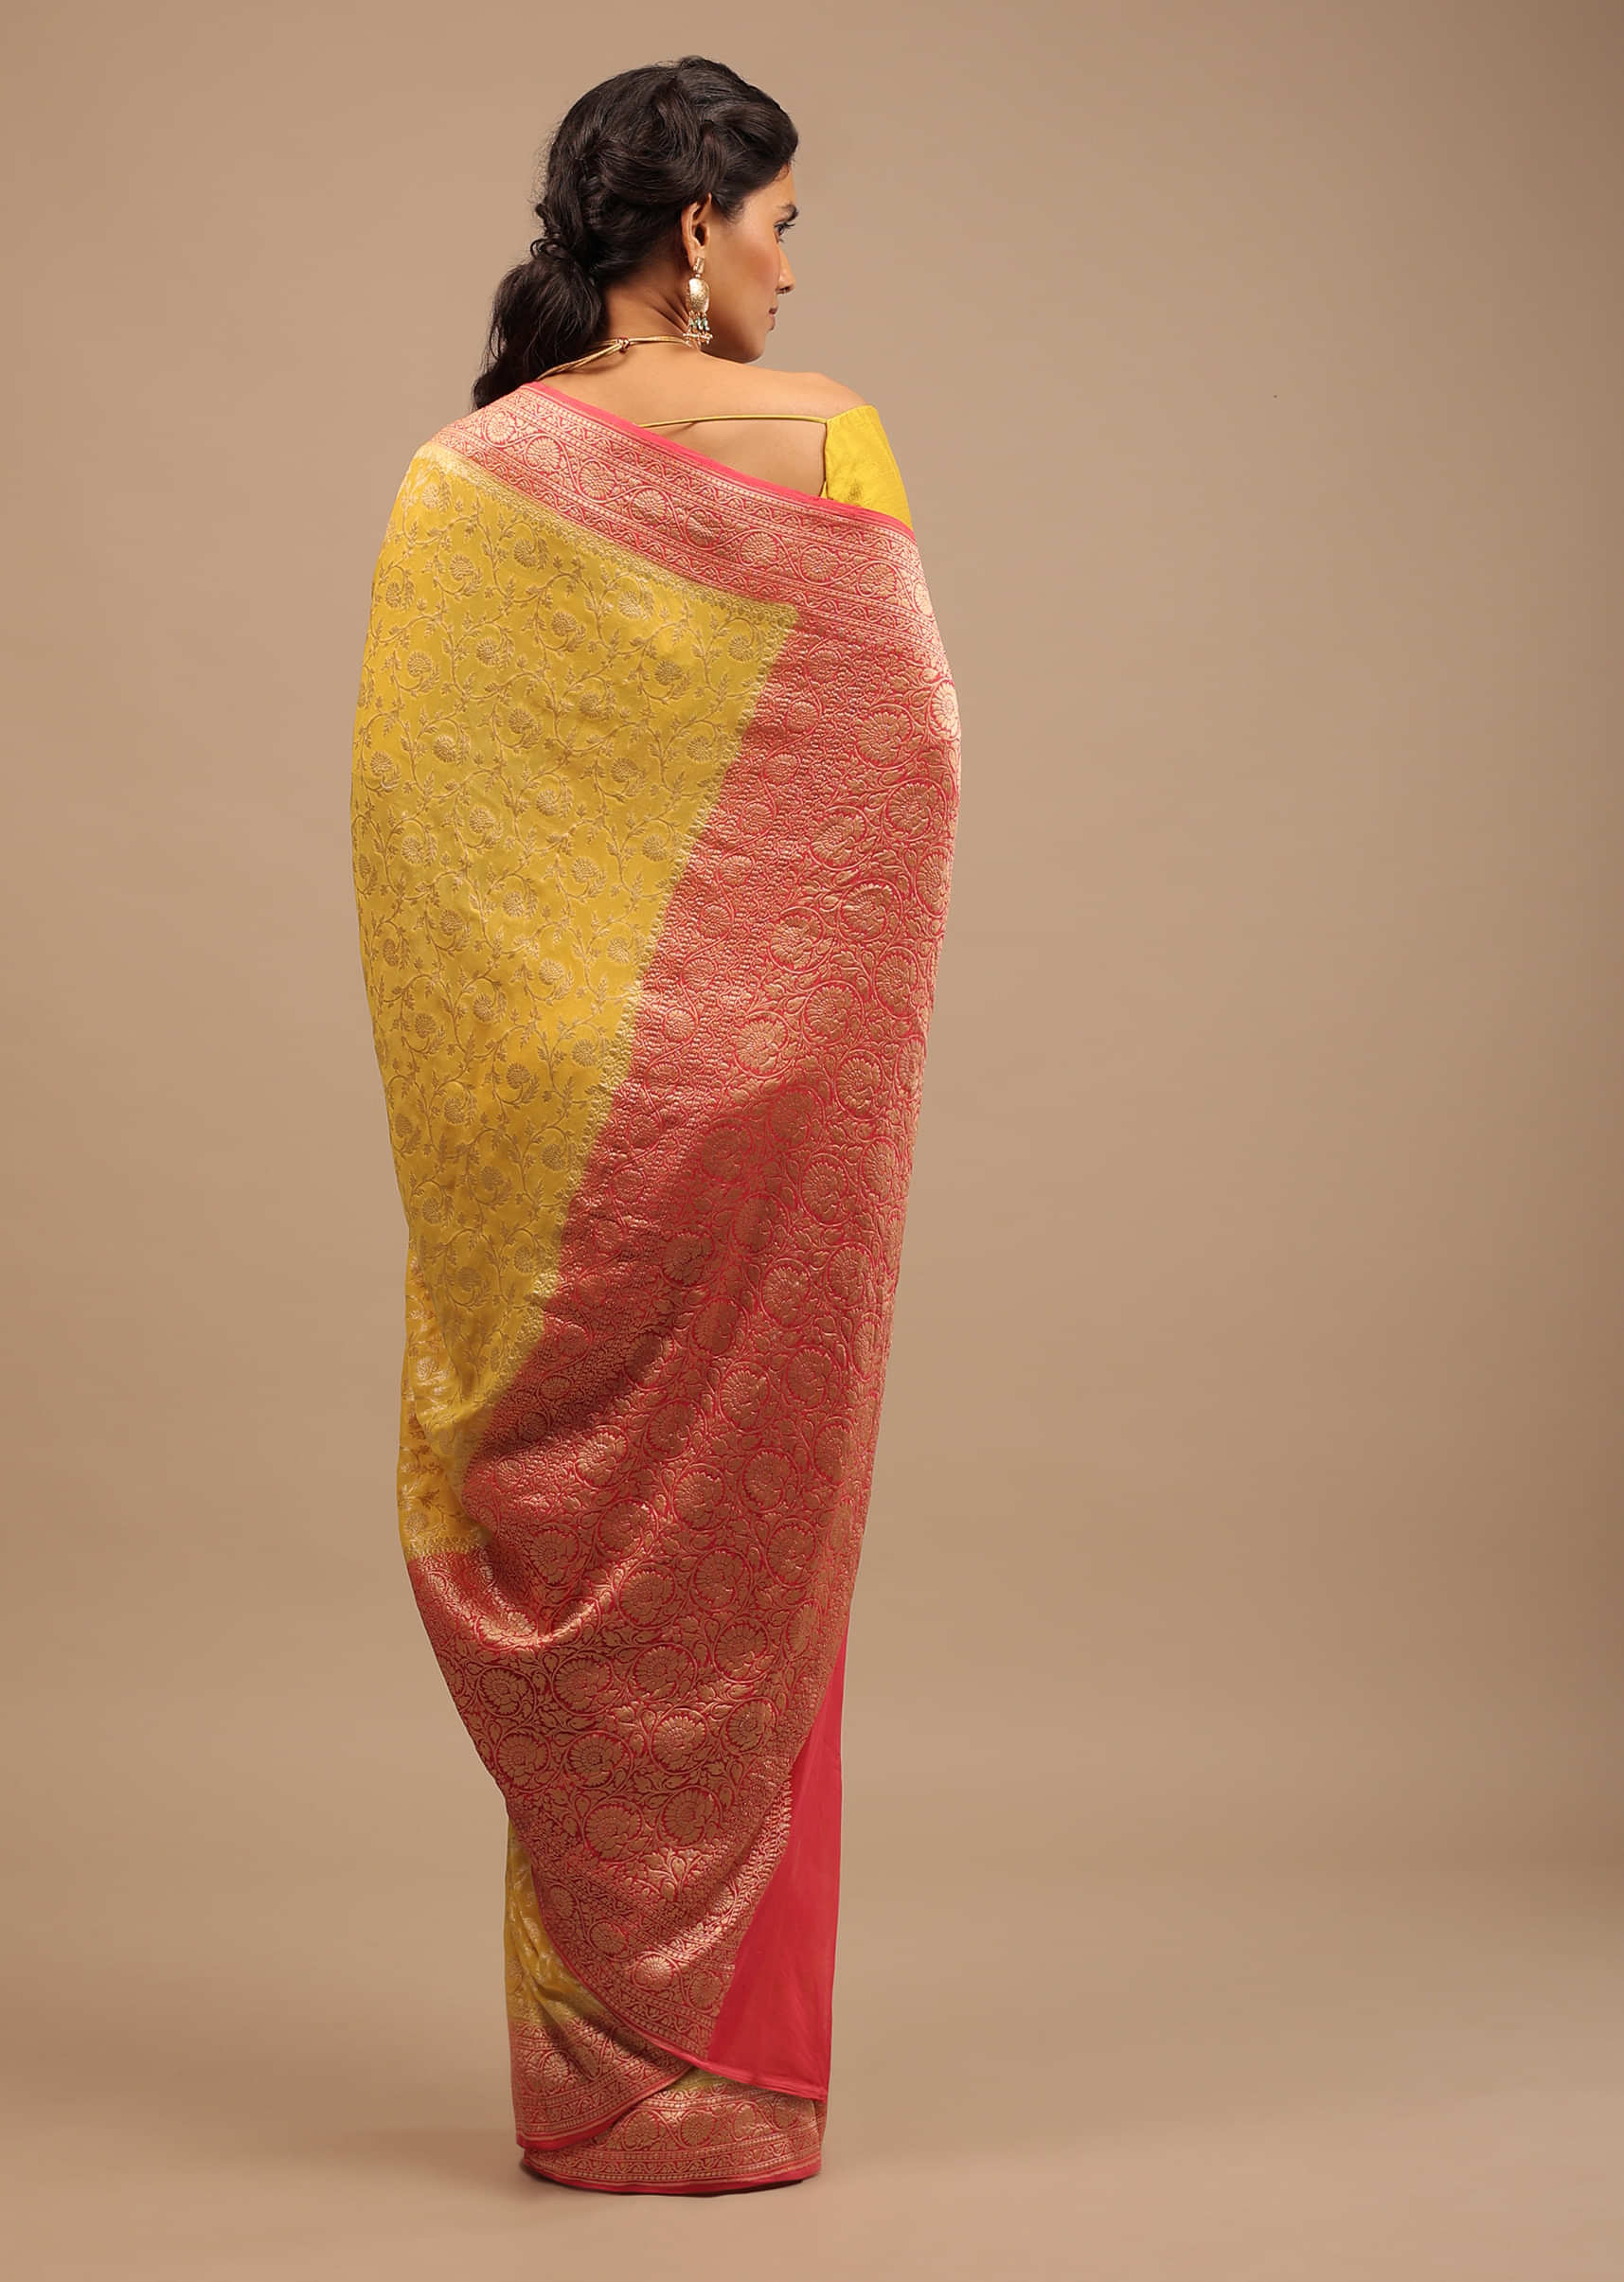 Canary Yellow Traditional Georgette Saree With Orange Brocade Border And Jaal Work